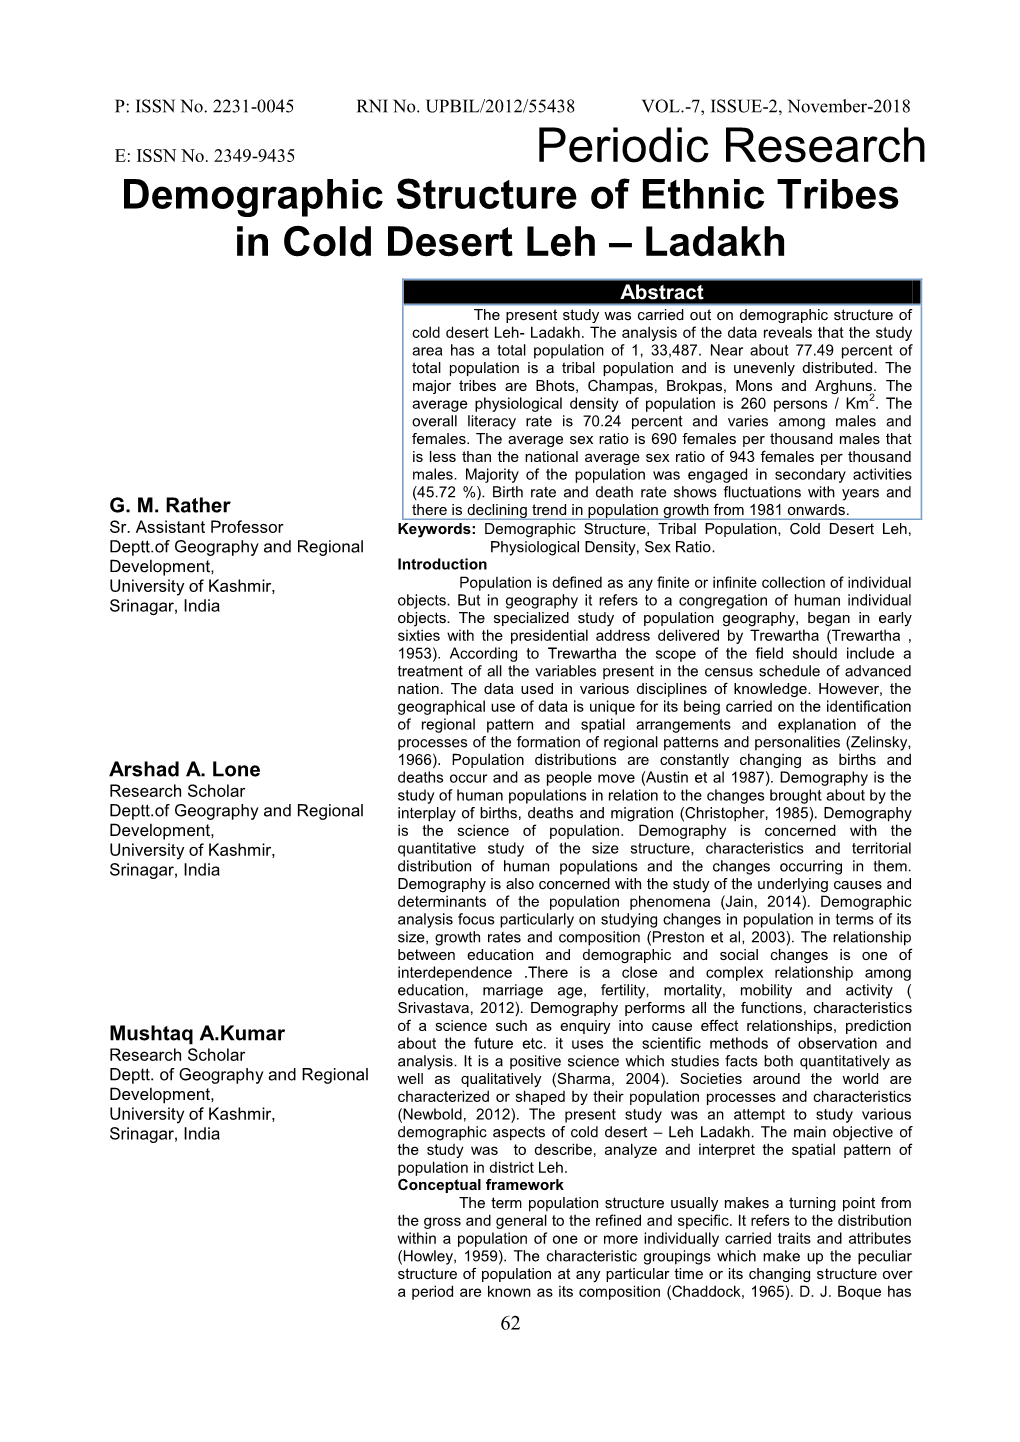 Demographic Structure of Ethnic Tribes in Cold Desert Leh – Ladakh Abstract the Present Study Was Carried out on Demographic Structure of Cold Desert Leh- Ladakh